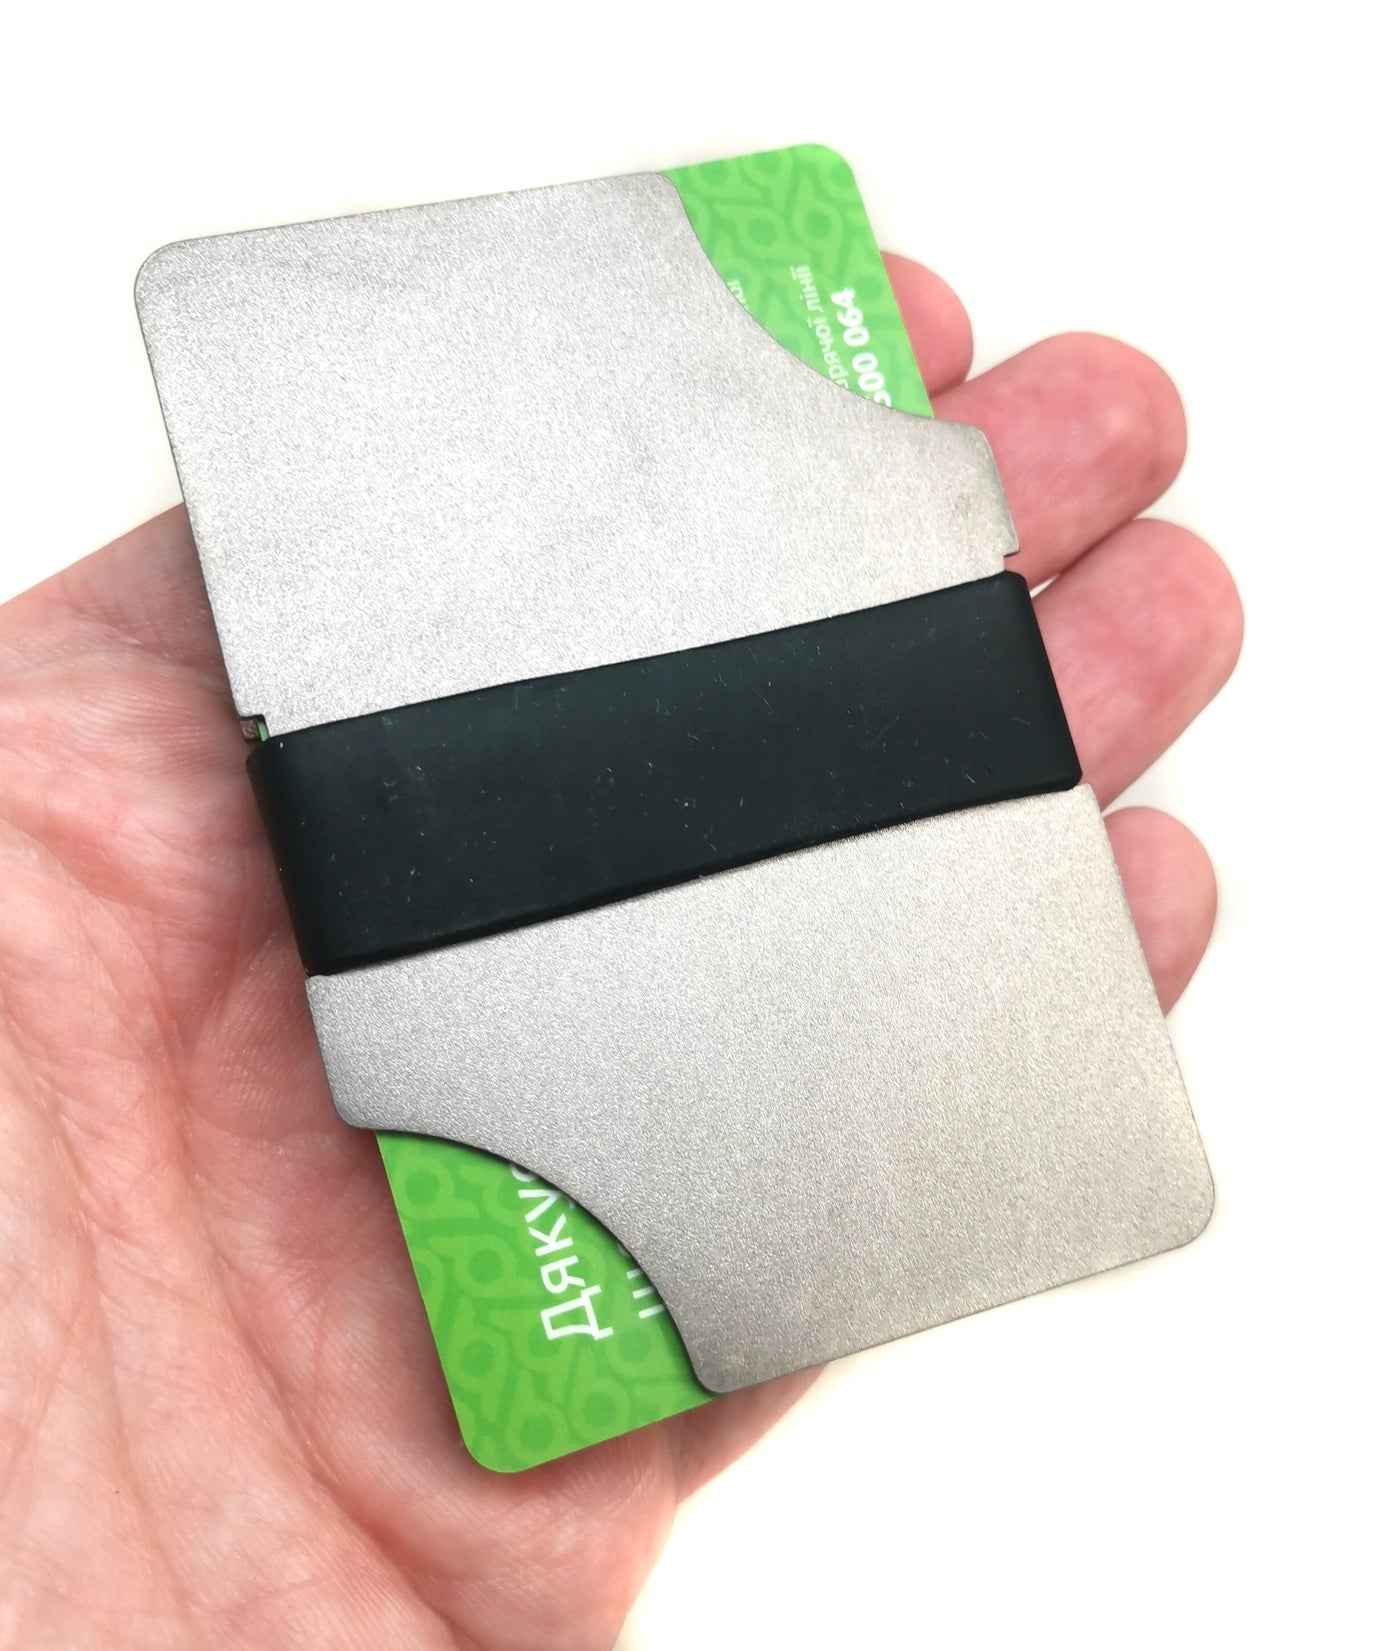 Top-rated cardholder with RFID protection